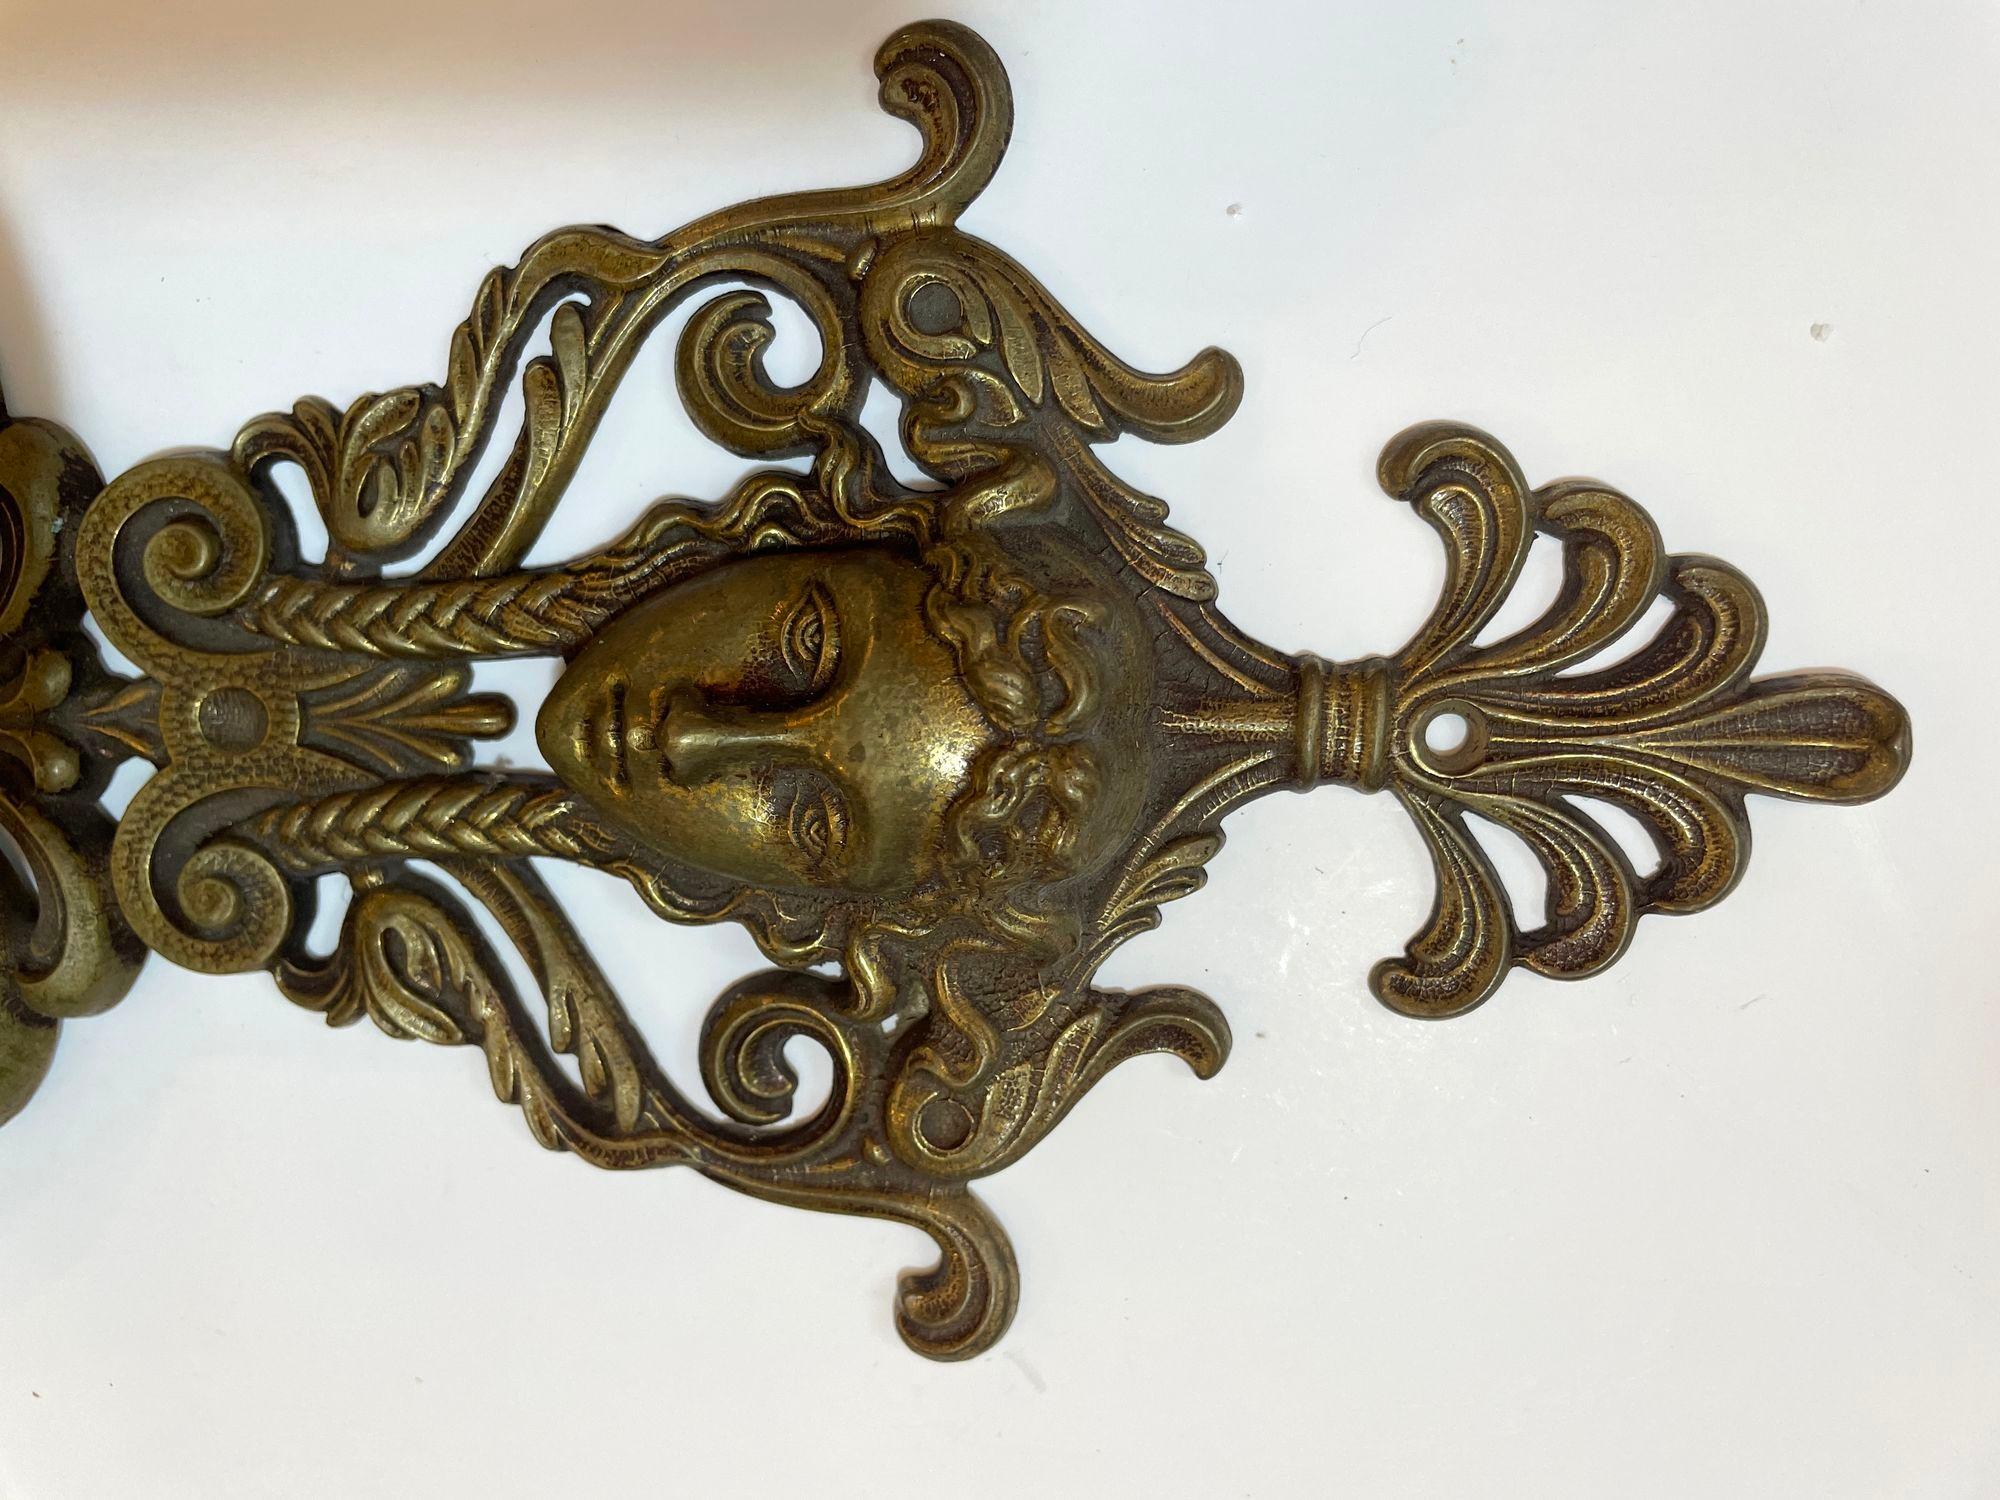 Antique Ornate Italian Figural Architectural Cast Brass Wall Hook Decor Set of 3 For Sale 8